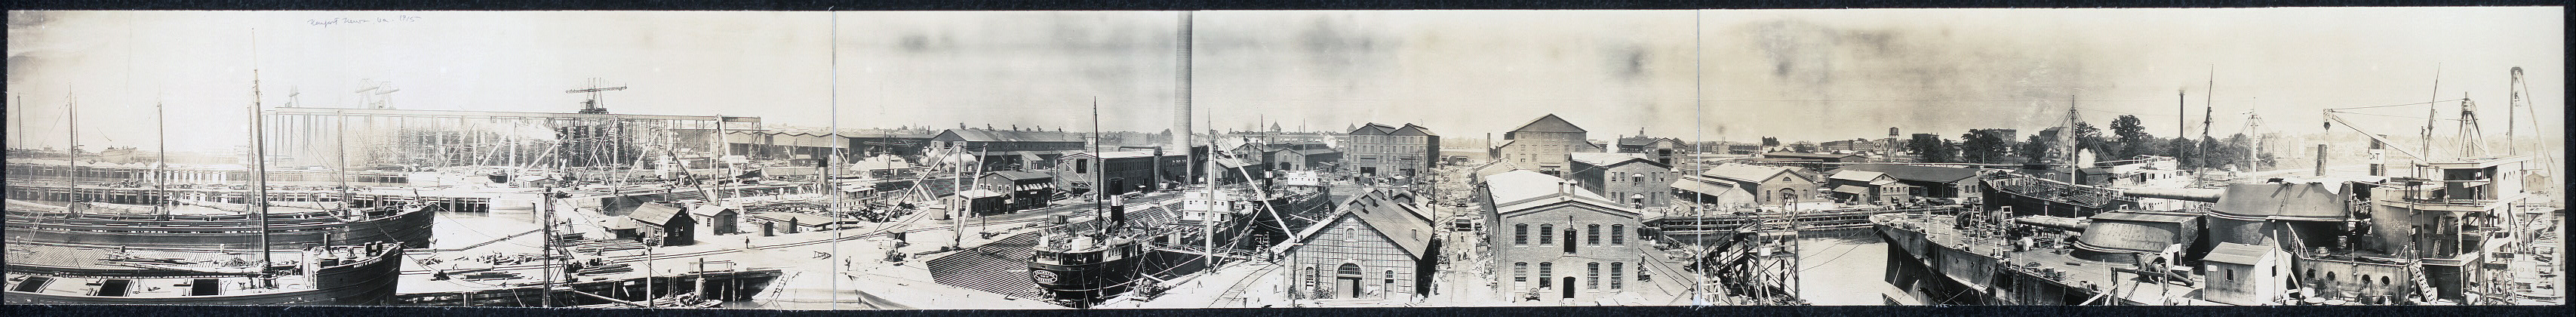 A black and white panoramic view of ships and buildings along the coast in Newport News, Virginia.  